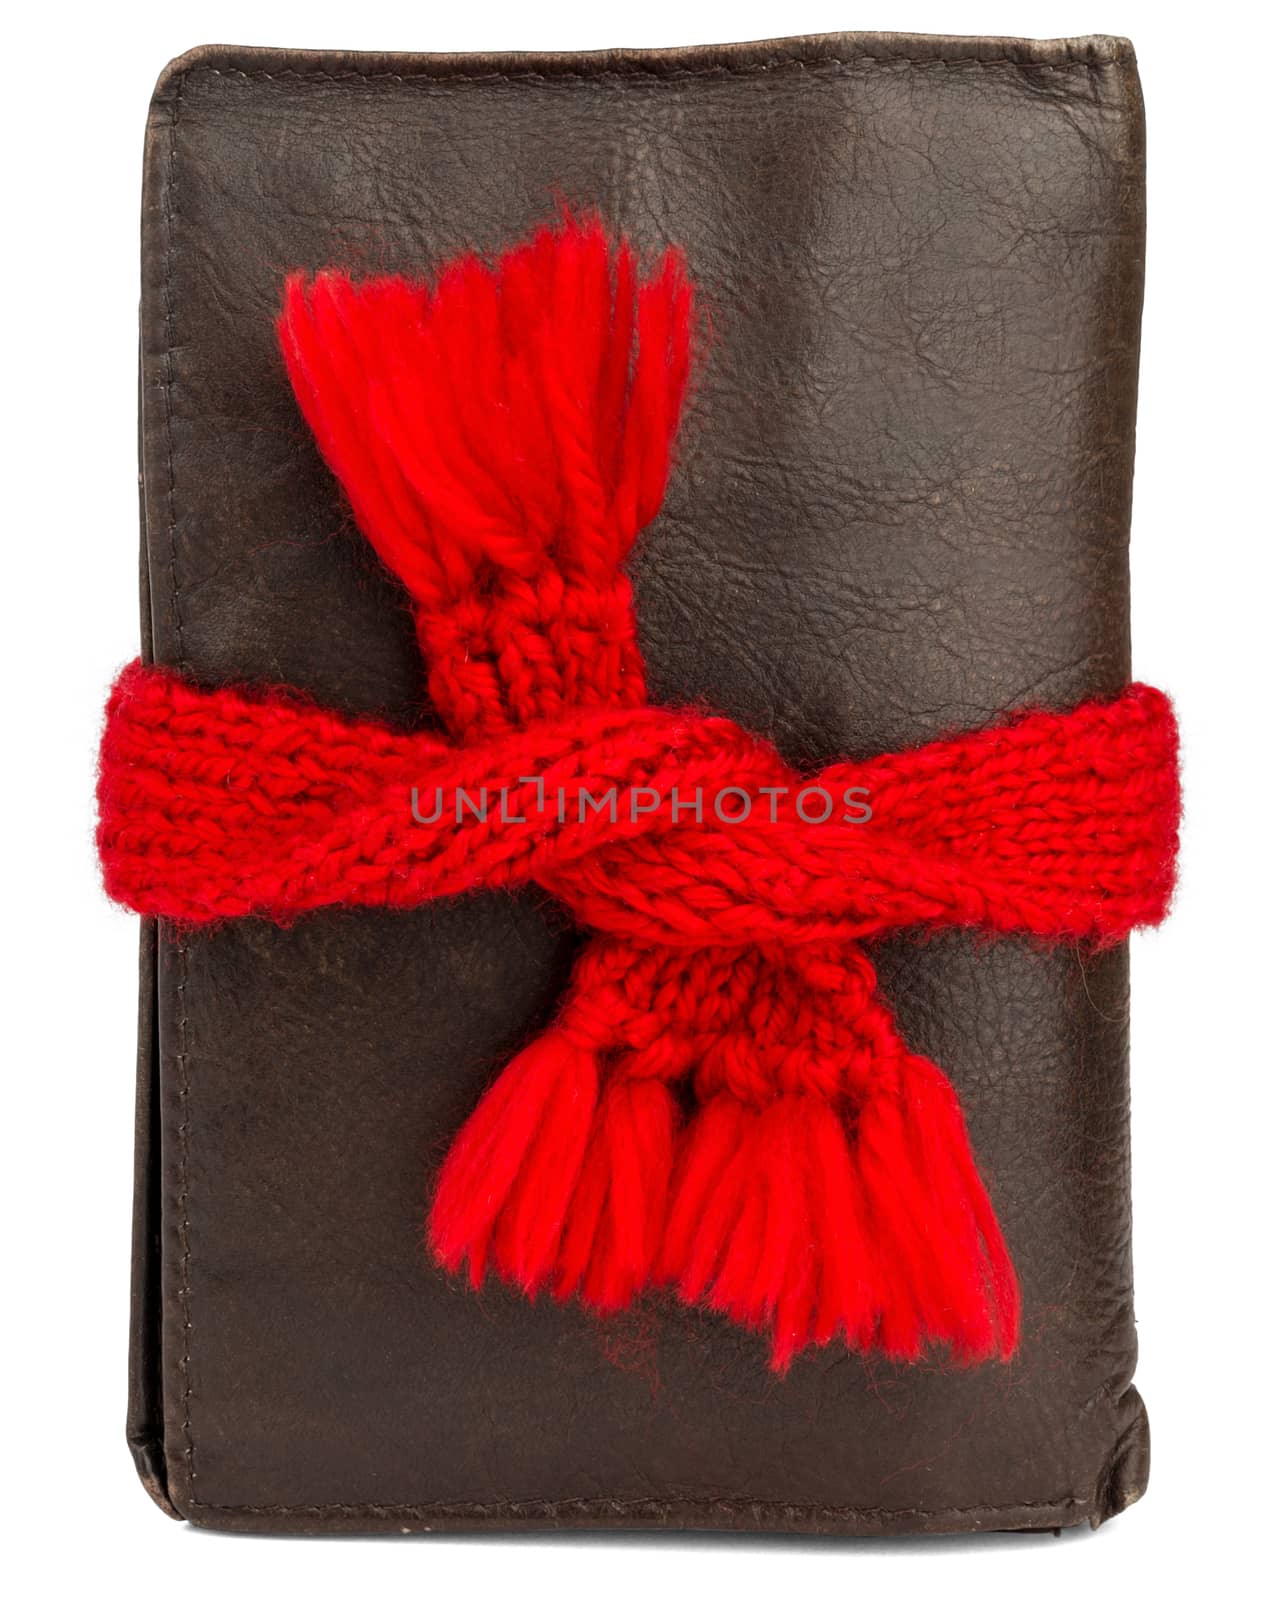 Preservation of money. Wallet wearing red scarf. Isolated on white background